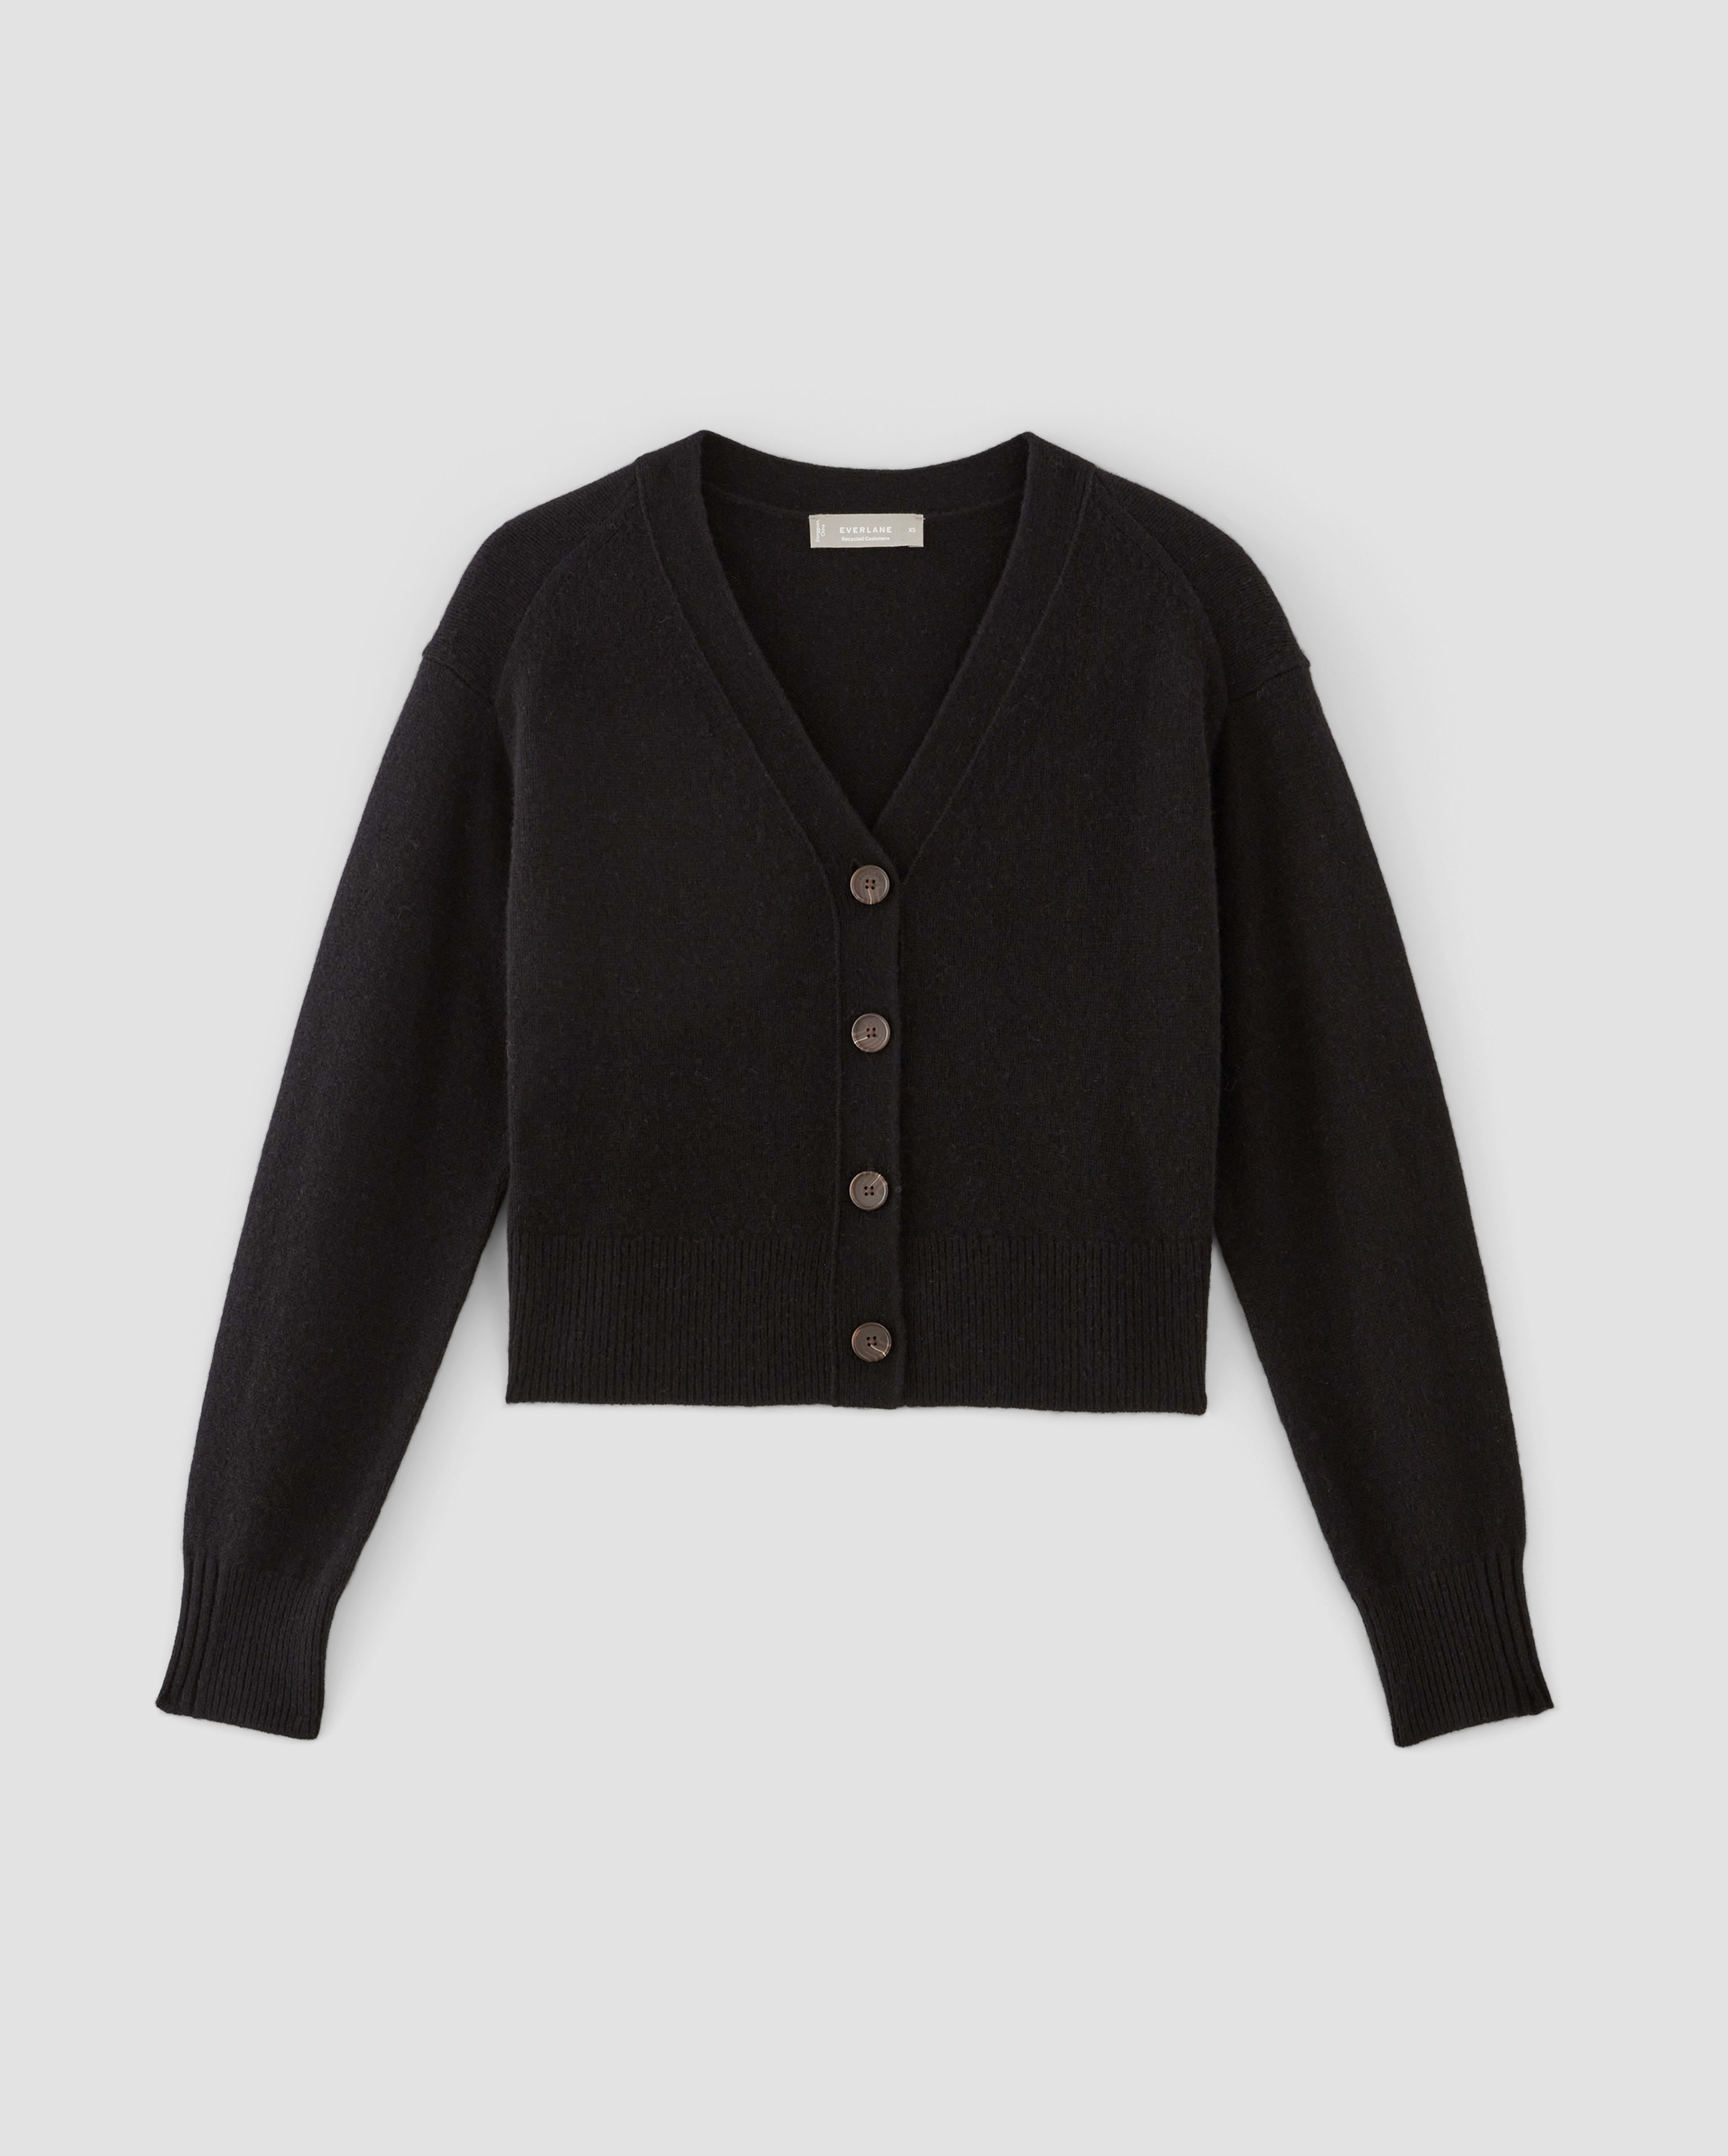 Image of The Cashmere Cardigan